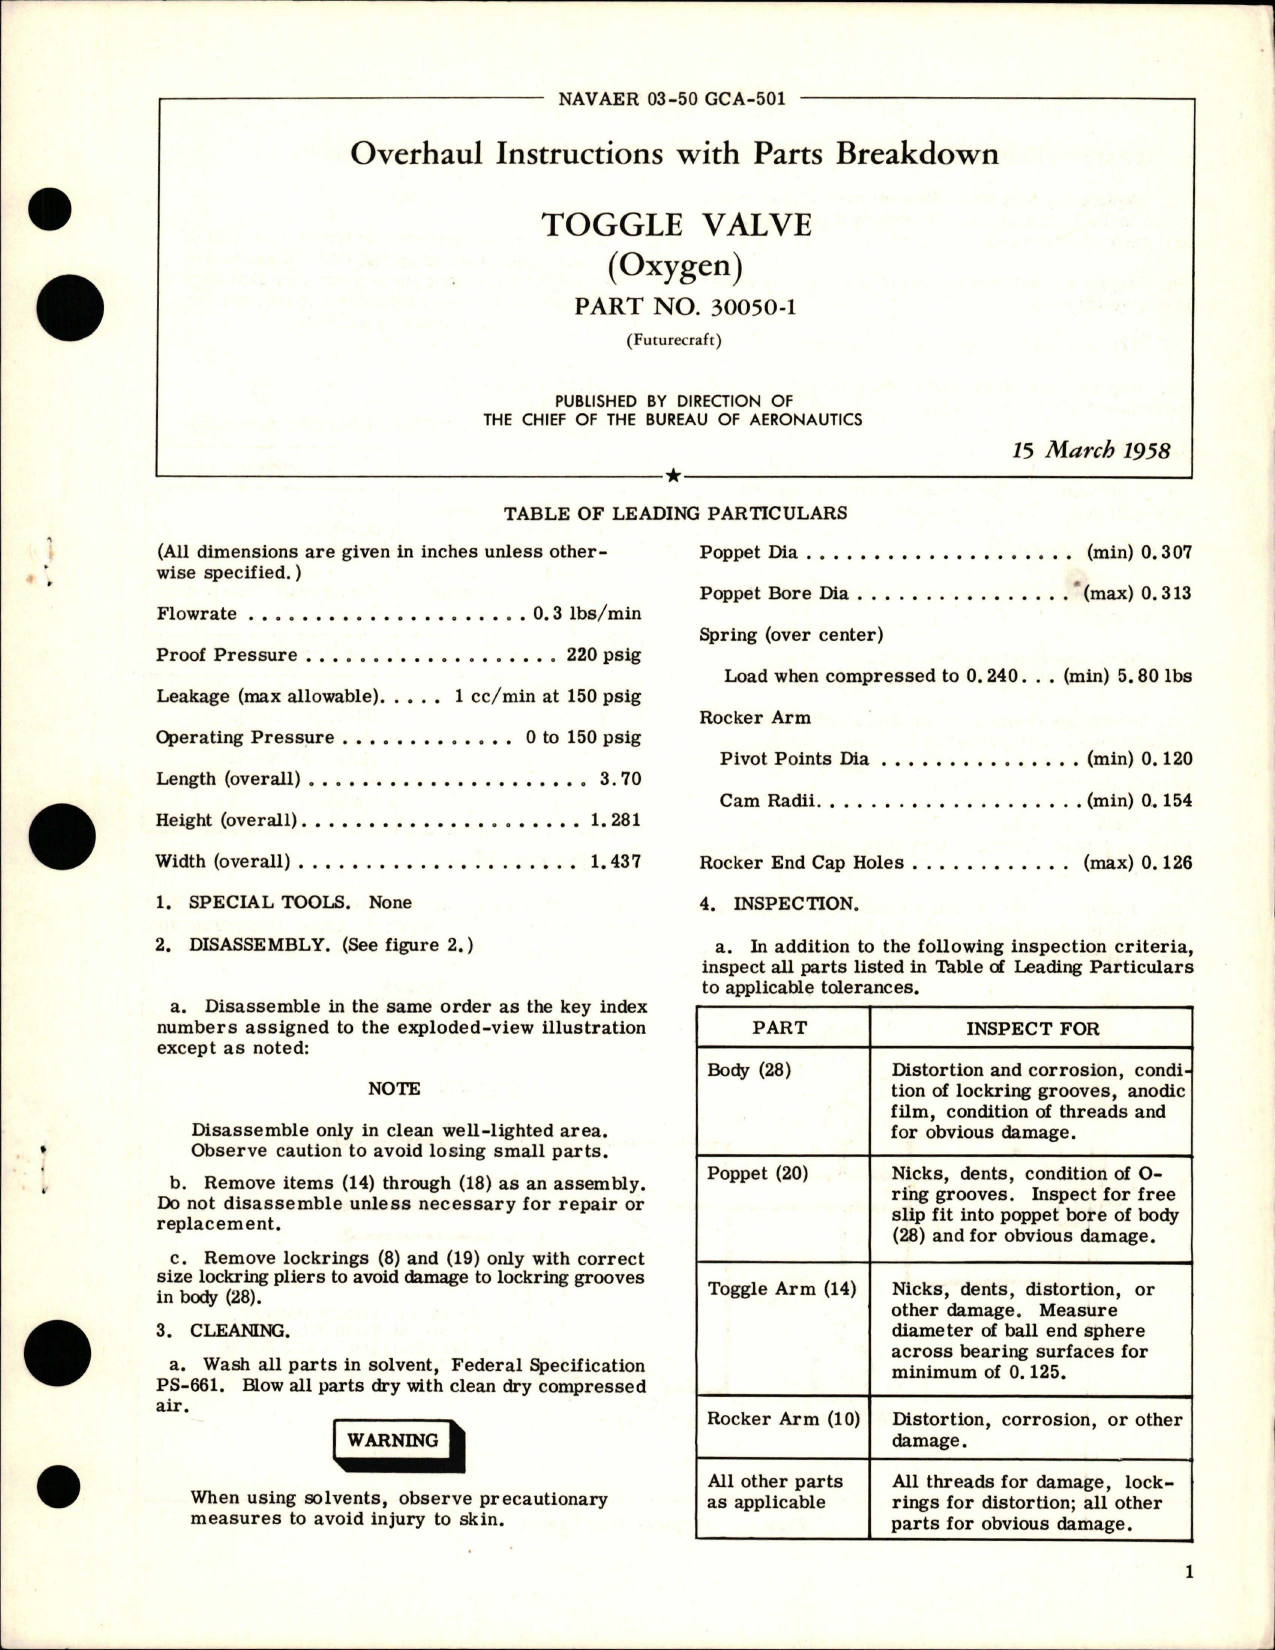 Sample page 1 from AirCorps Library document: Oxygen Toggle Valve - Part 30050-1 